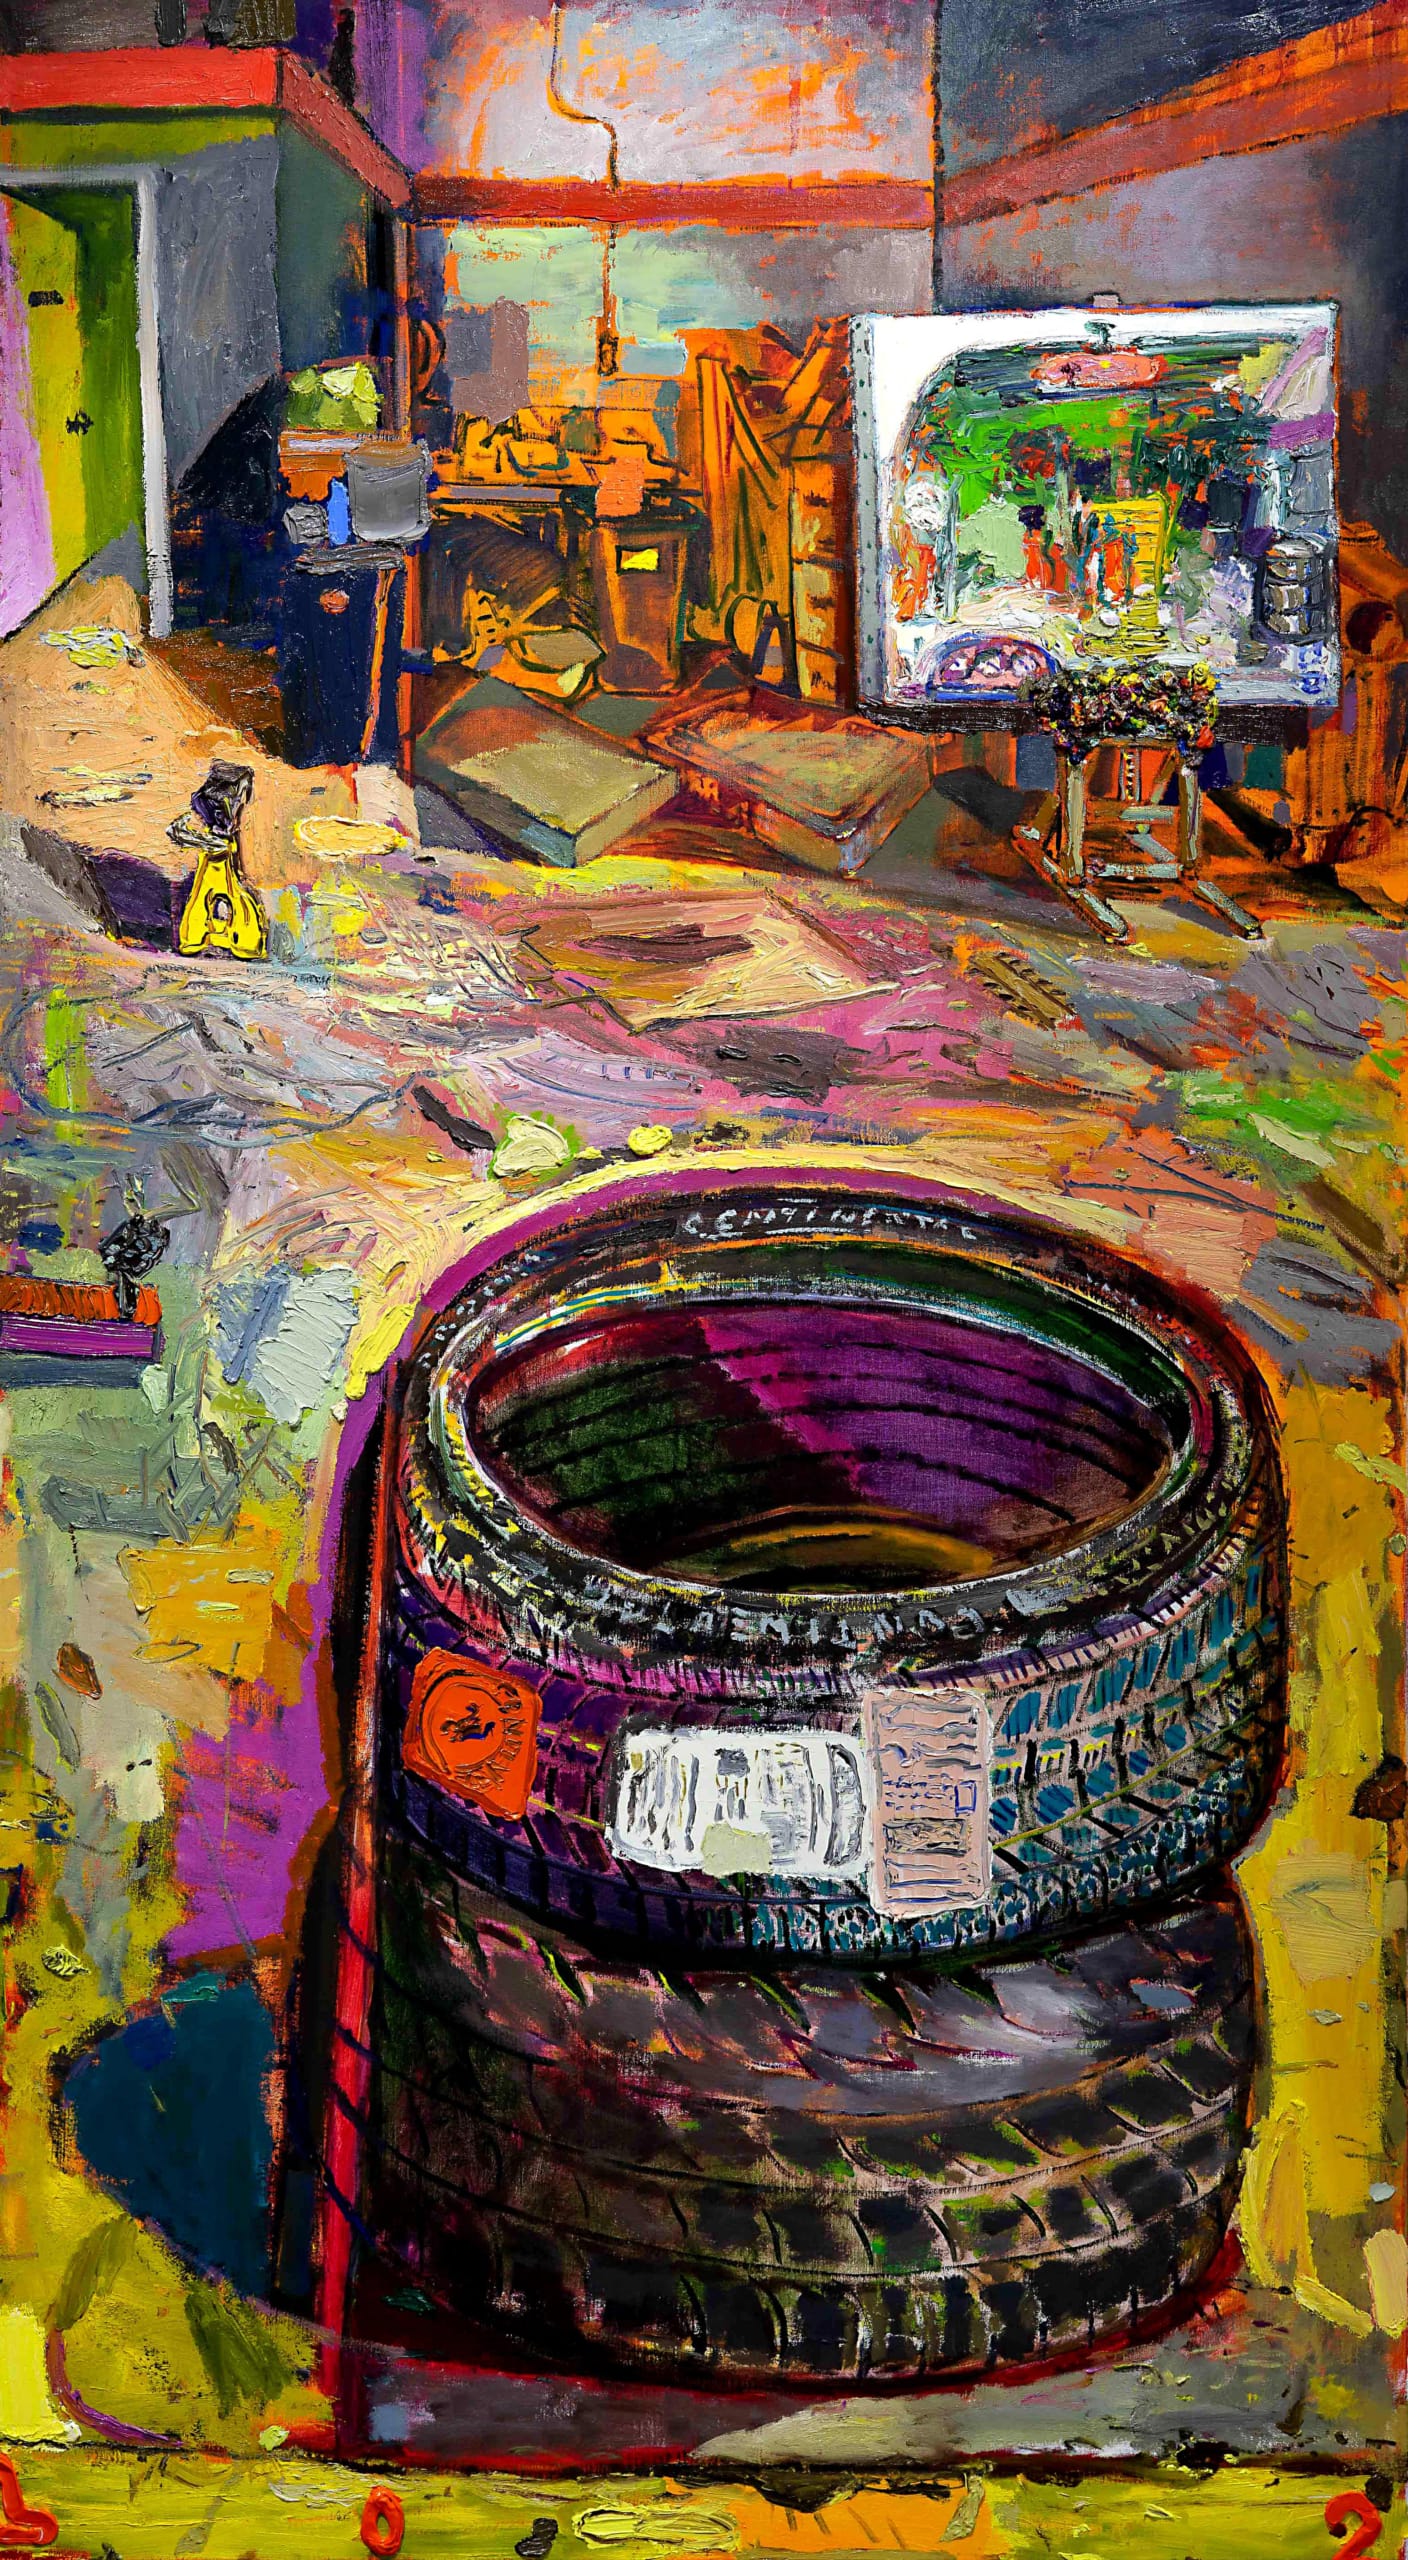 Jefreid Lotti | Painting of a Painting and Two Tires, 2022 | 68"x38"in, Oil on linen